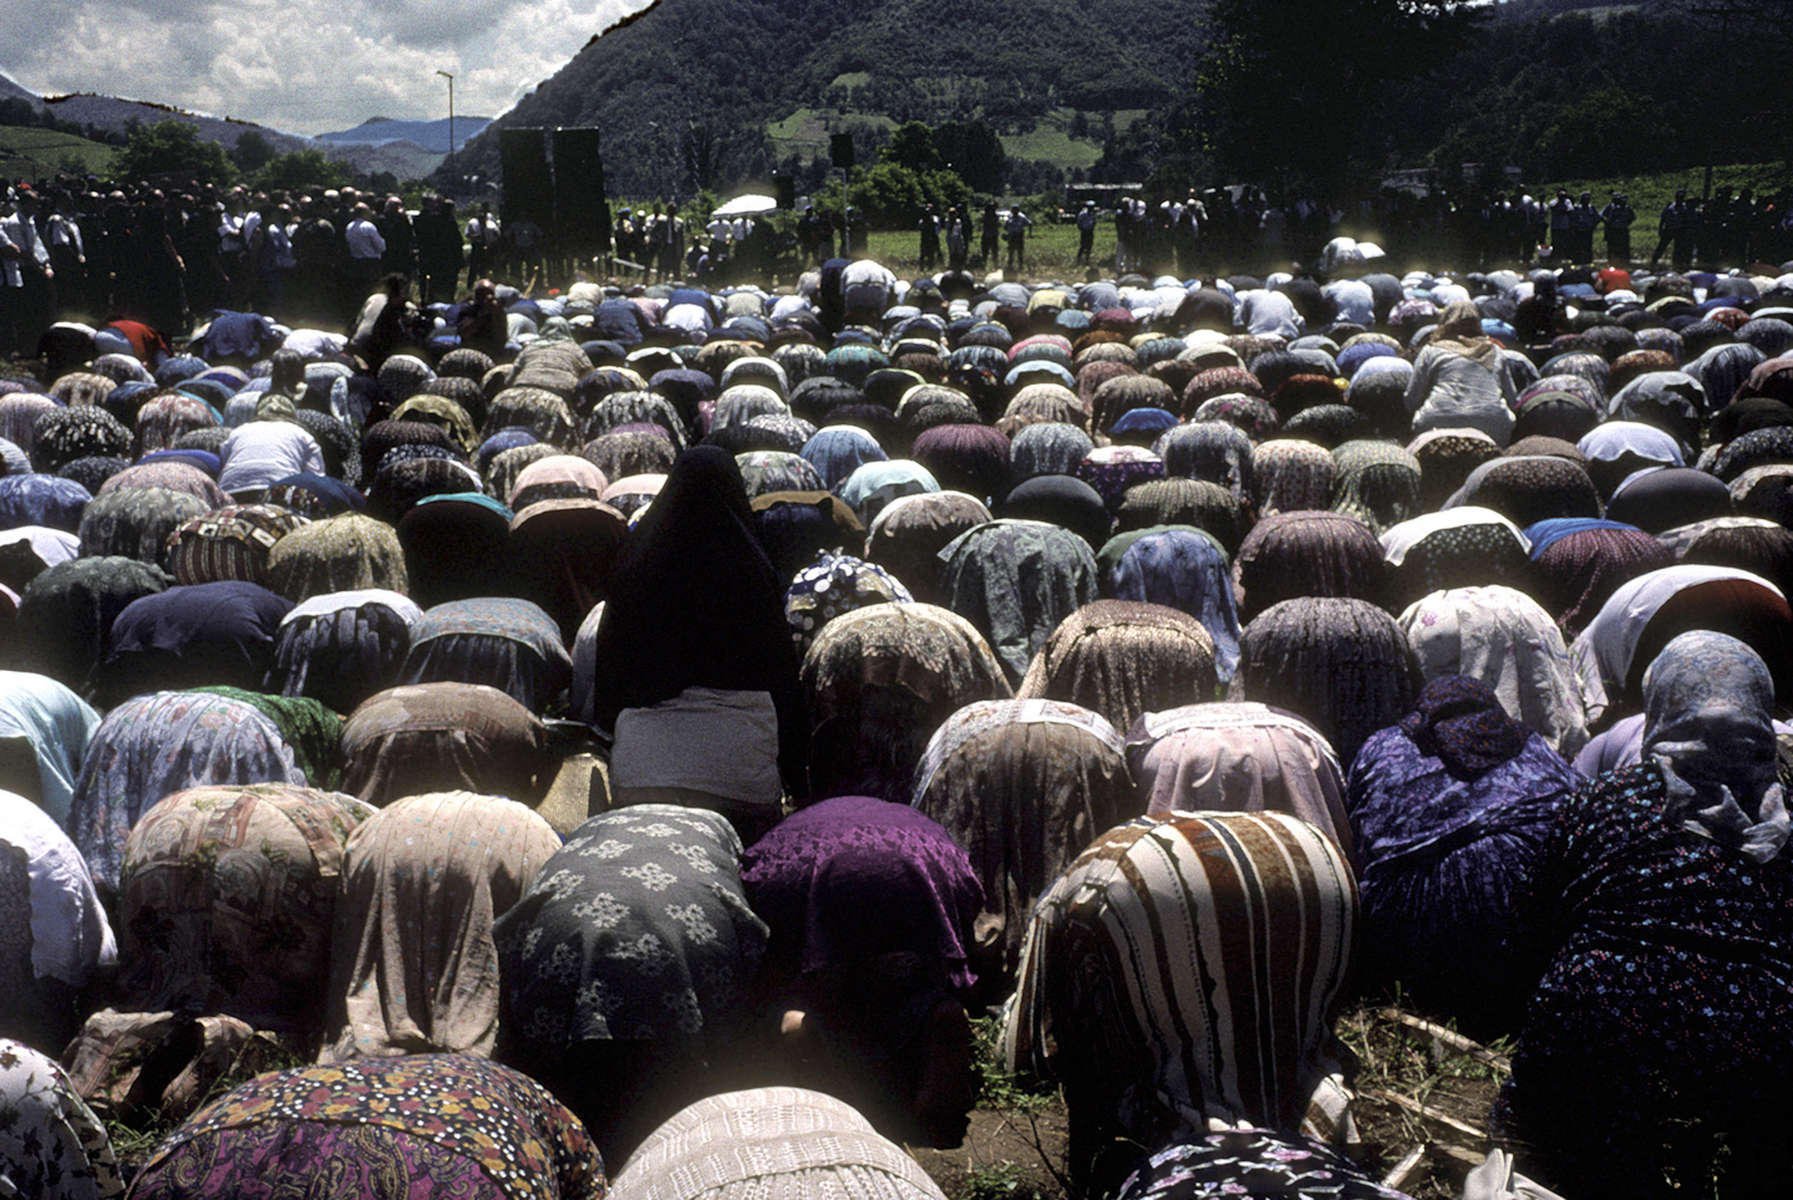 Muslim widows pray during ceremonies marking the groundbreaking of a memorial site for the 7,000 to 8,000 Muslim men and boys who were slaughtered when Srebrenica was overrun by Serb forces in July 1995. The memorial is a few kilometers down the road from Srebrenica, across from a now-abandoned factory, where many of the men were kiled.